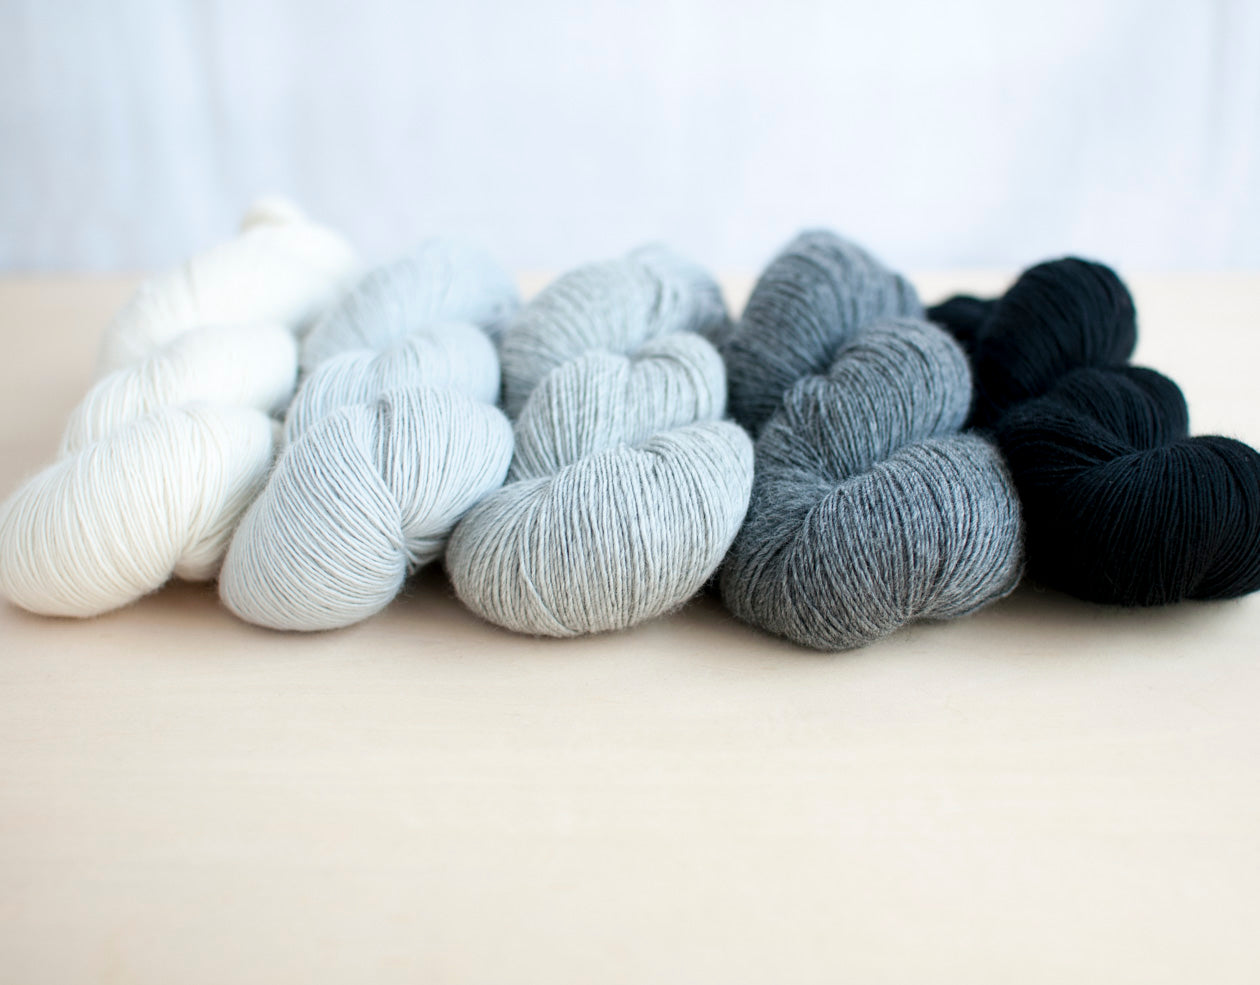 Super Bulky Weight Yarn Archives - Purl Soho